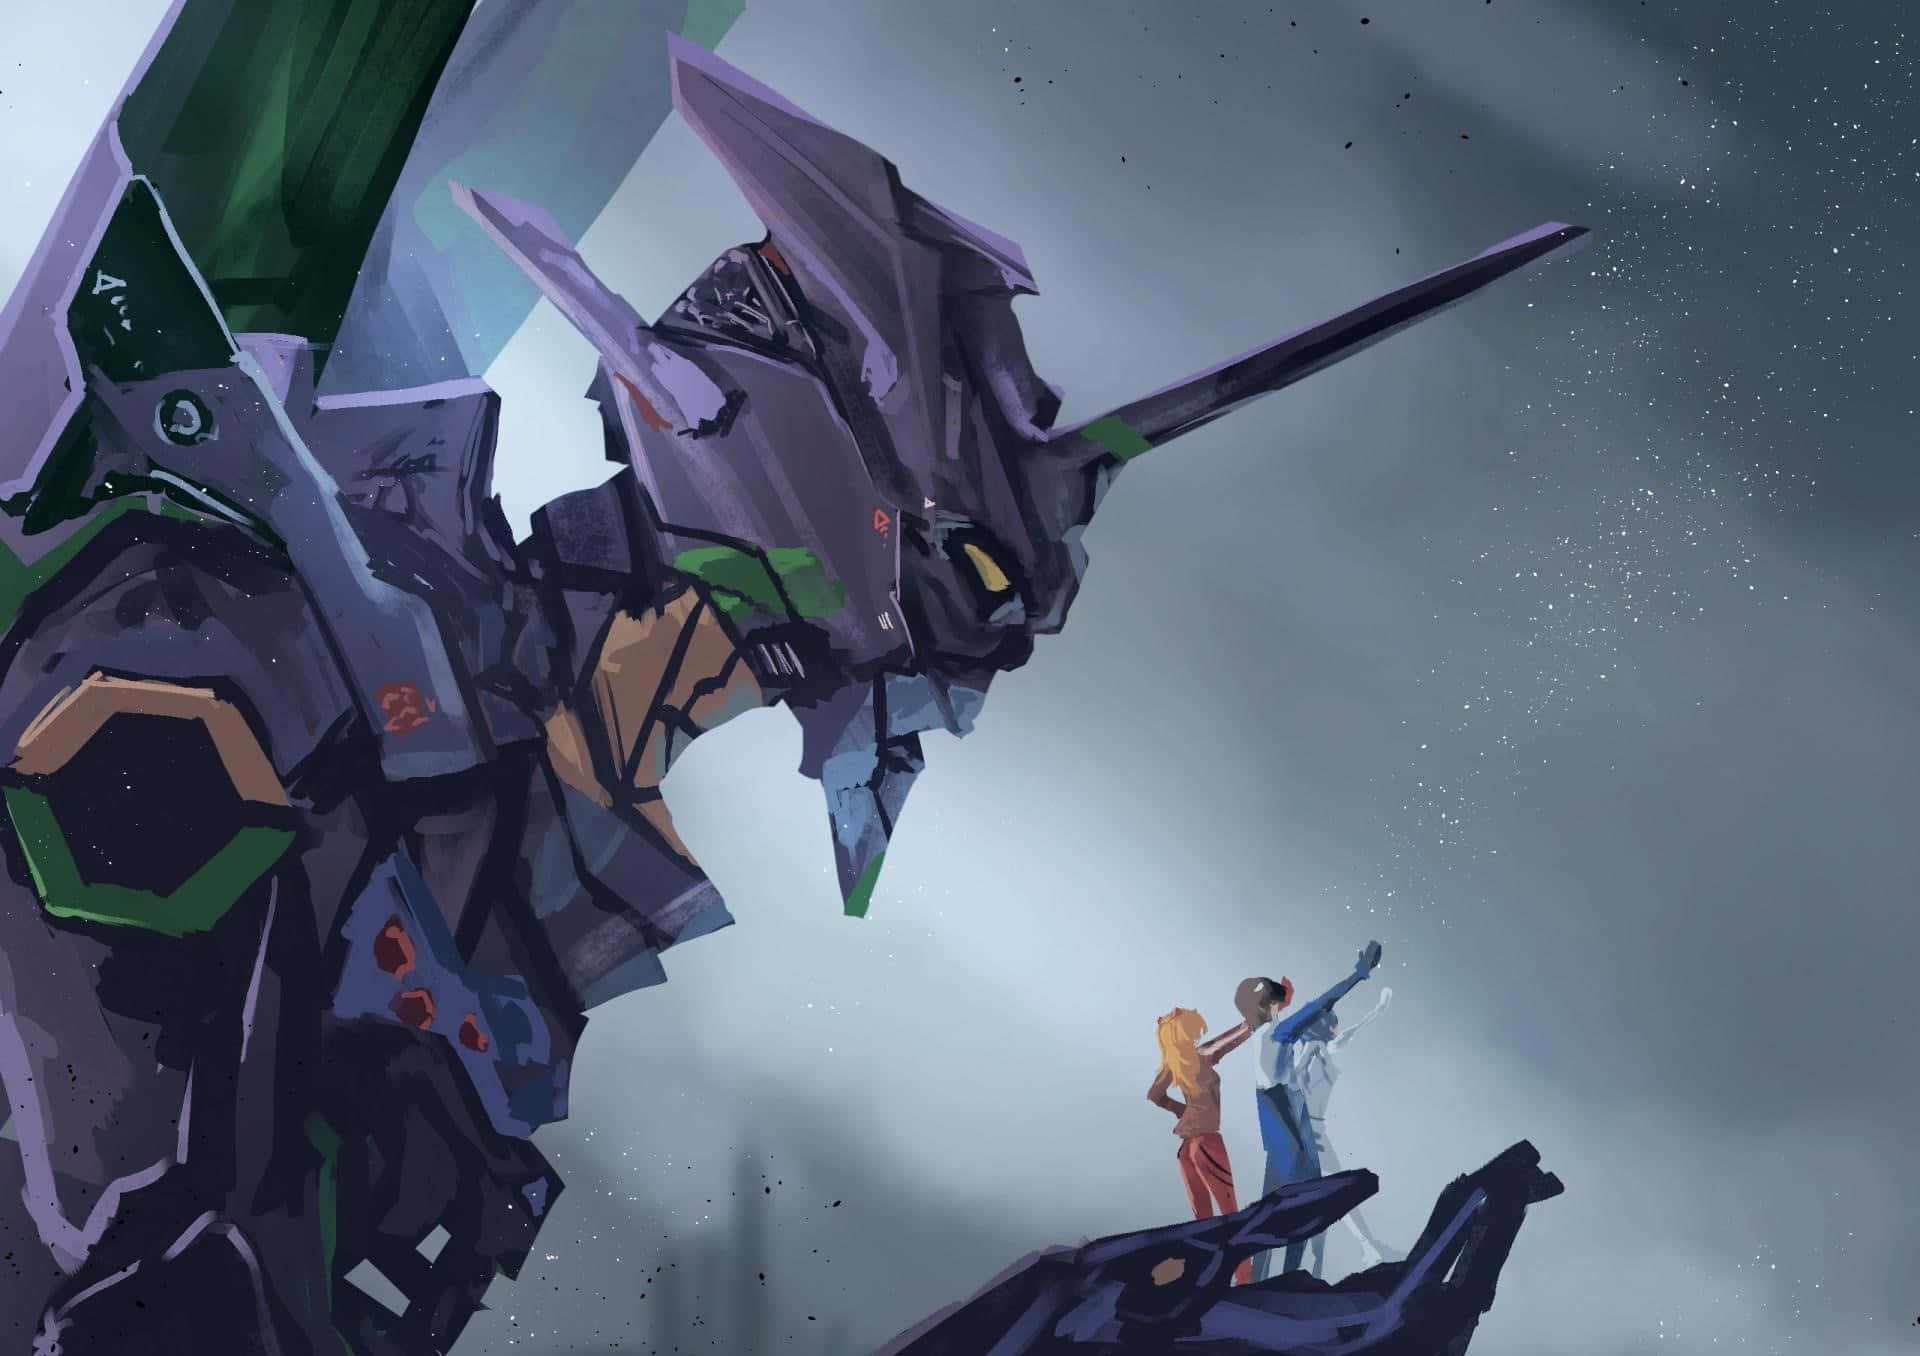 Eva-01 battles an Angel in a thrilling spectacle of light